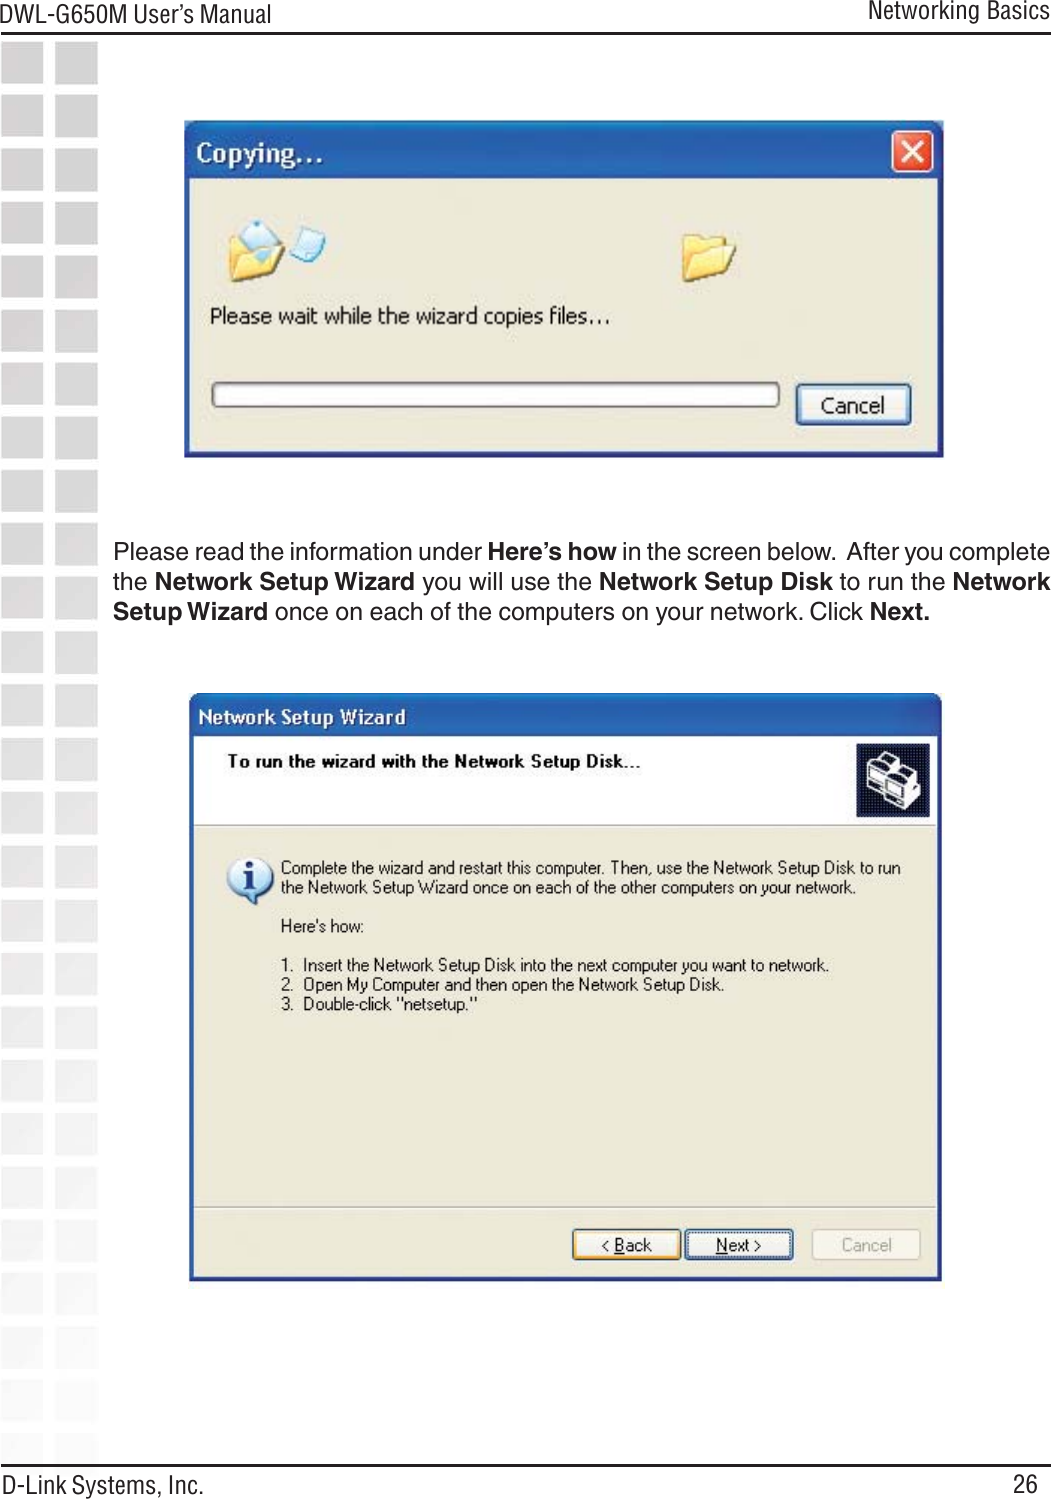 26DWL-G650M User’s ManualD-Link Systems, Inc.Networking BasicsPlease read the information under Here’s how in the screen below.  After you completethe Network Setup Wizard you will use the Network Setup Disk to run the NetworkSetup Wizard once on each of the computers on your network. Click Next.